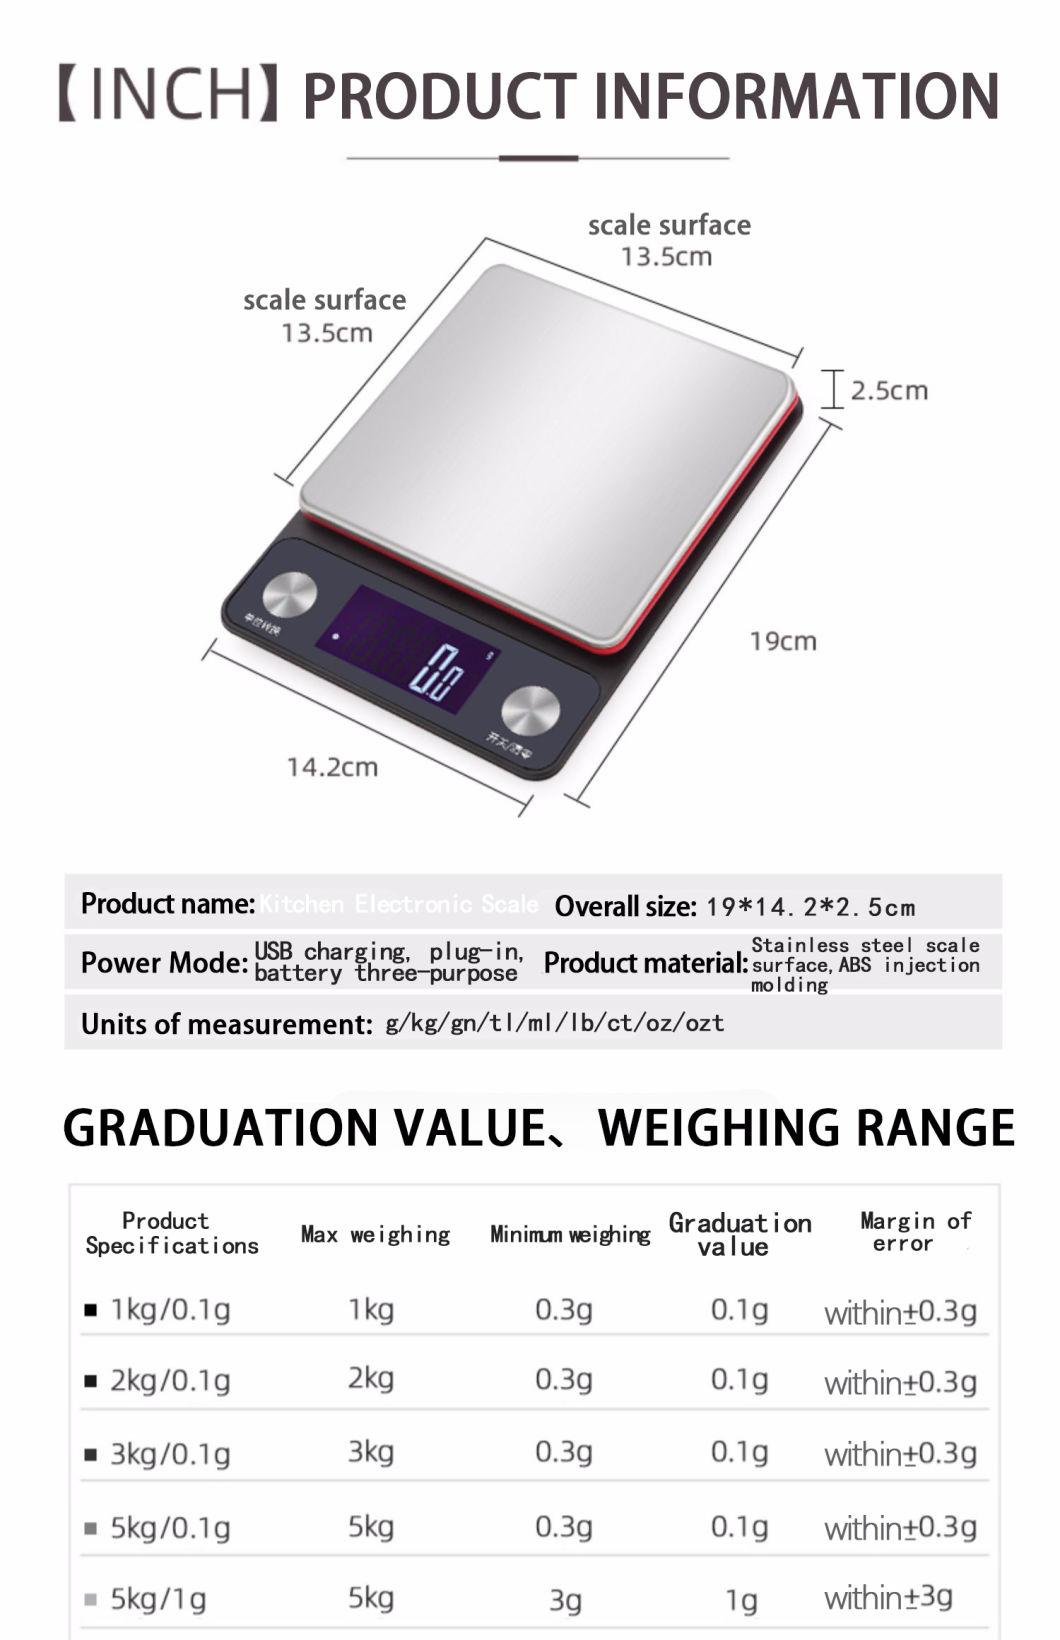 Stainless Steel Countertop Electronic Kitchen Food Scale